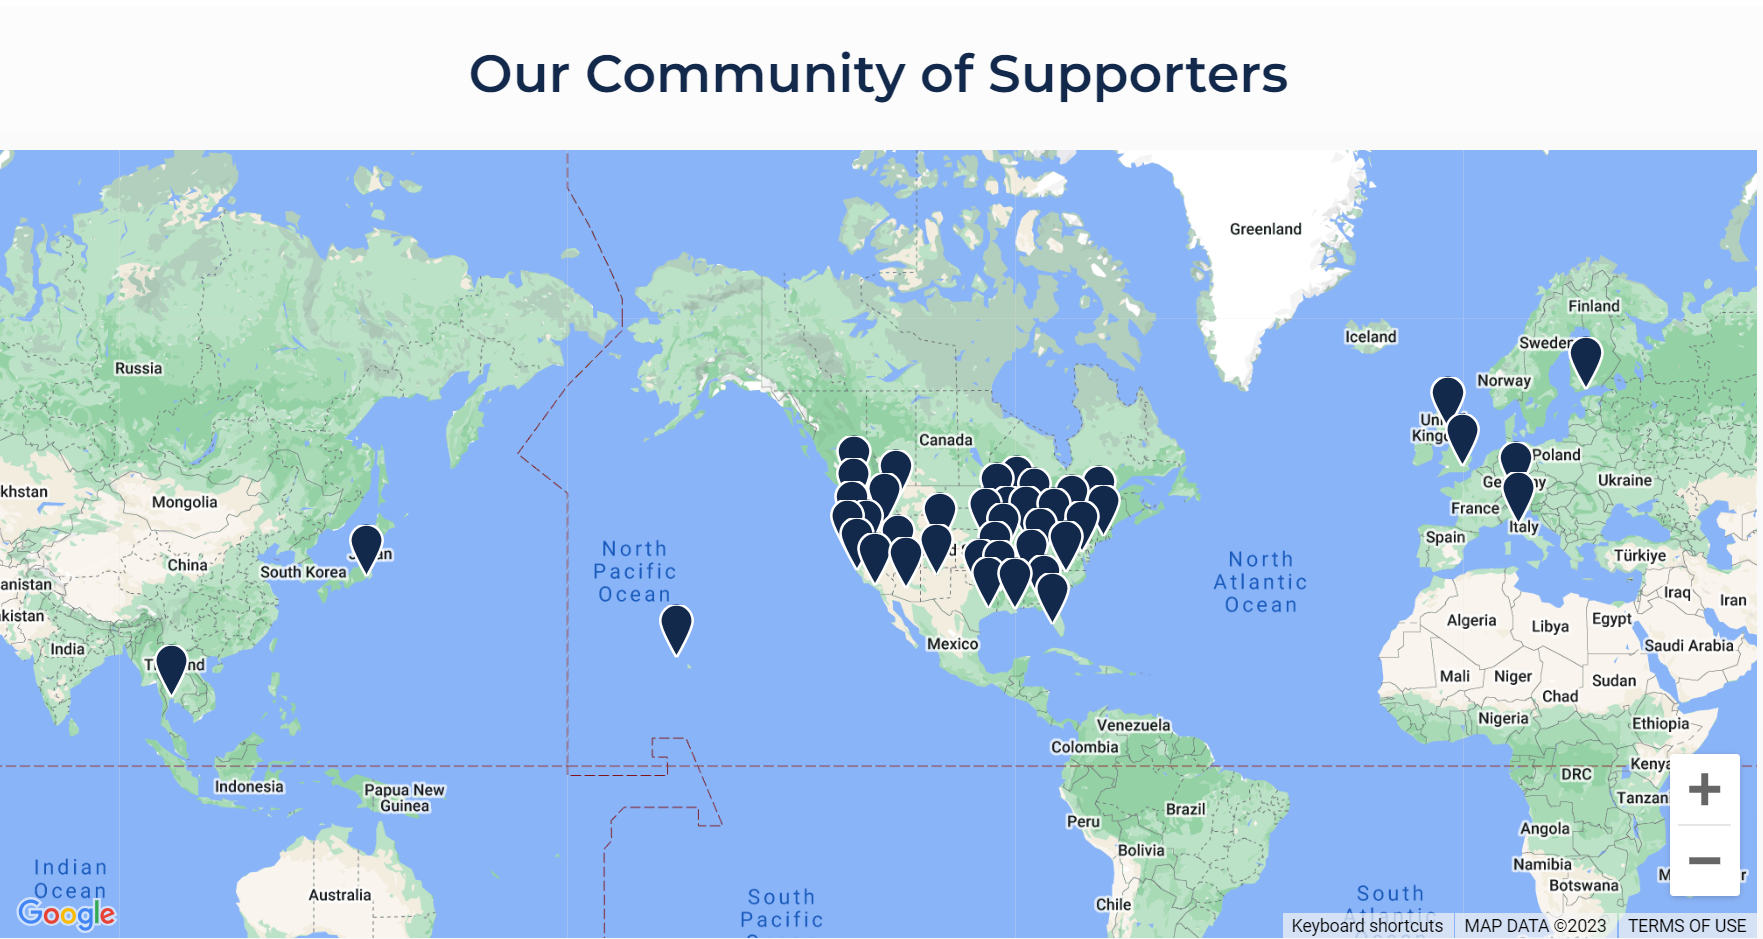 Graphic image of a mac with plot points and a header reading "Our Community of Supporters".